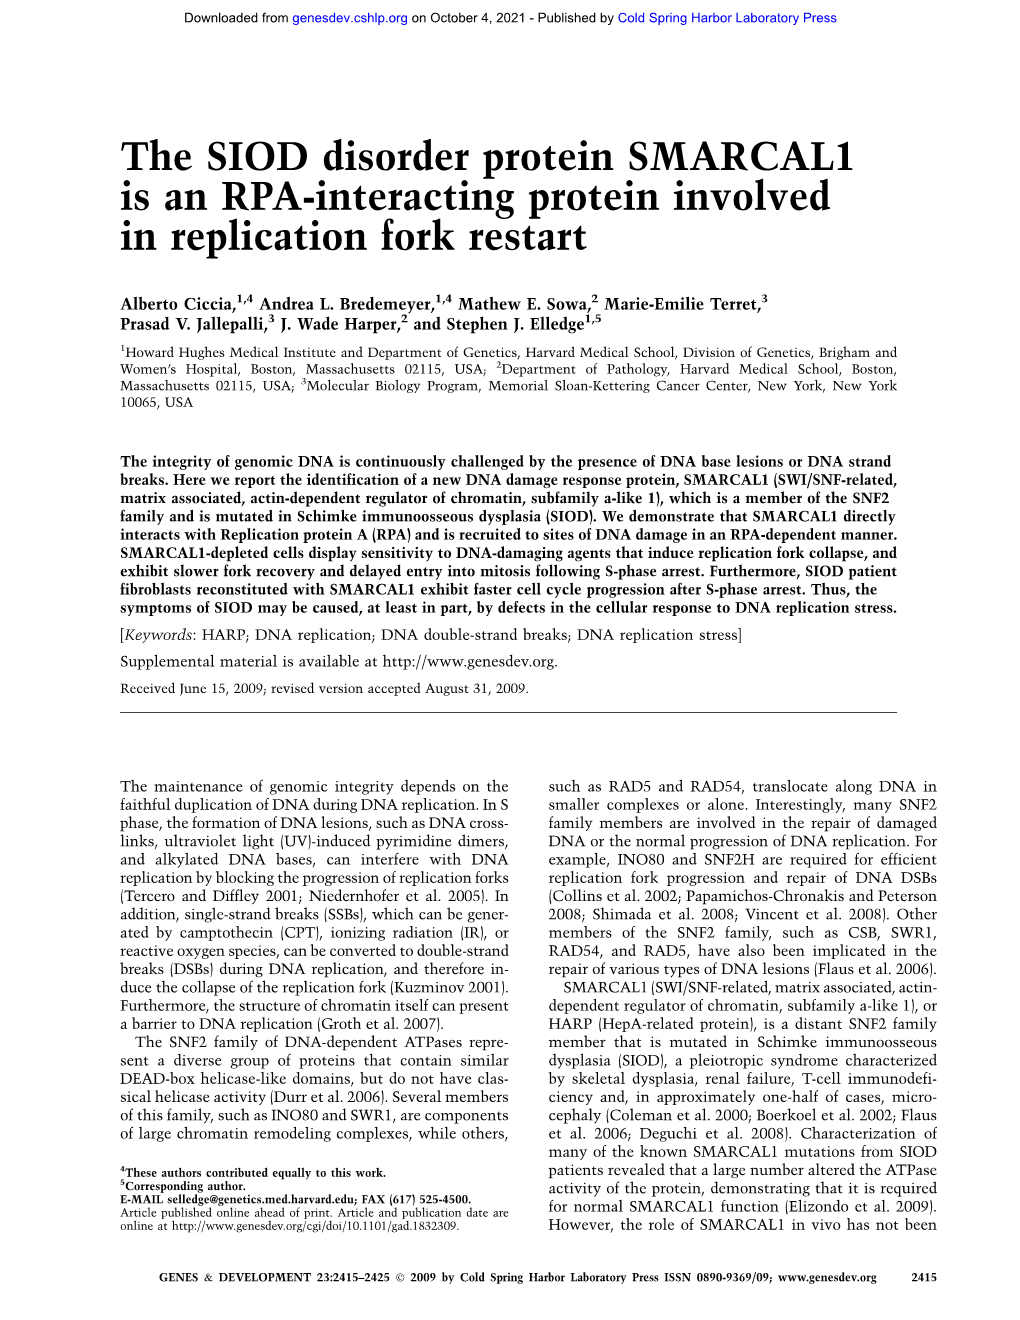 The SIOD Disorder Protein SMARCAL1 Is an RPA-Interacting Protein Involved in Replication Fork Restart